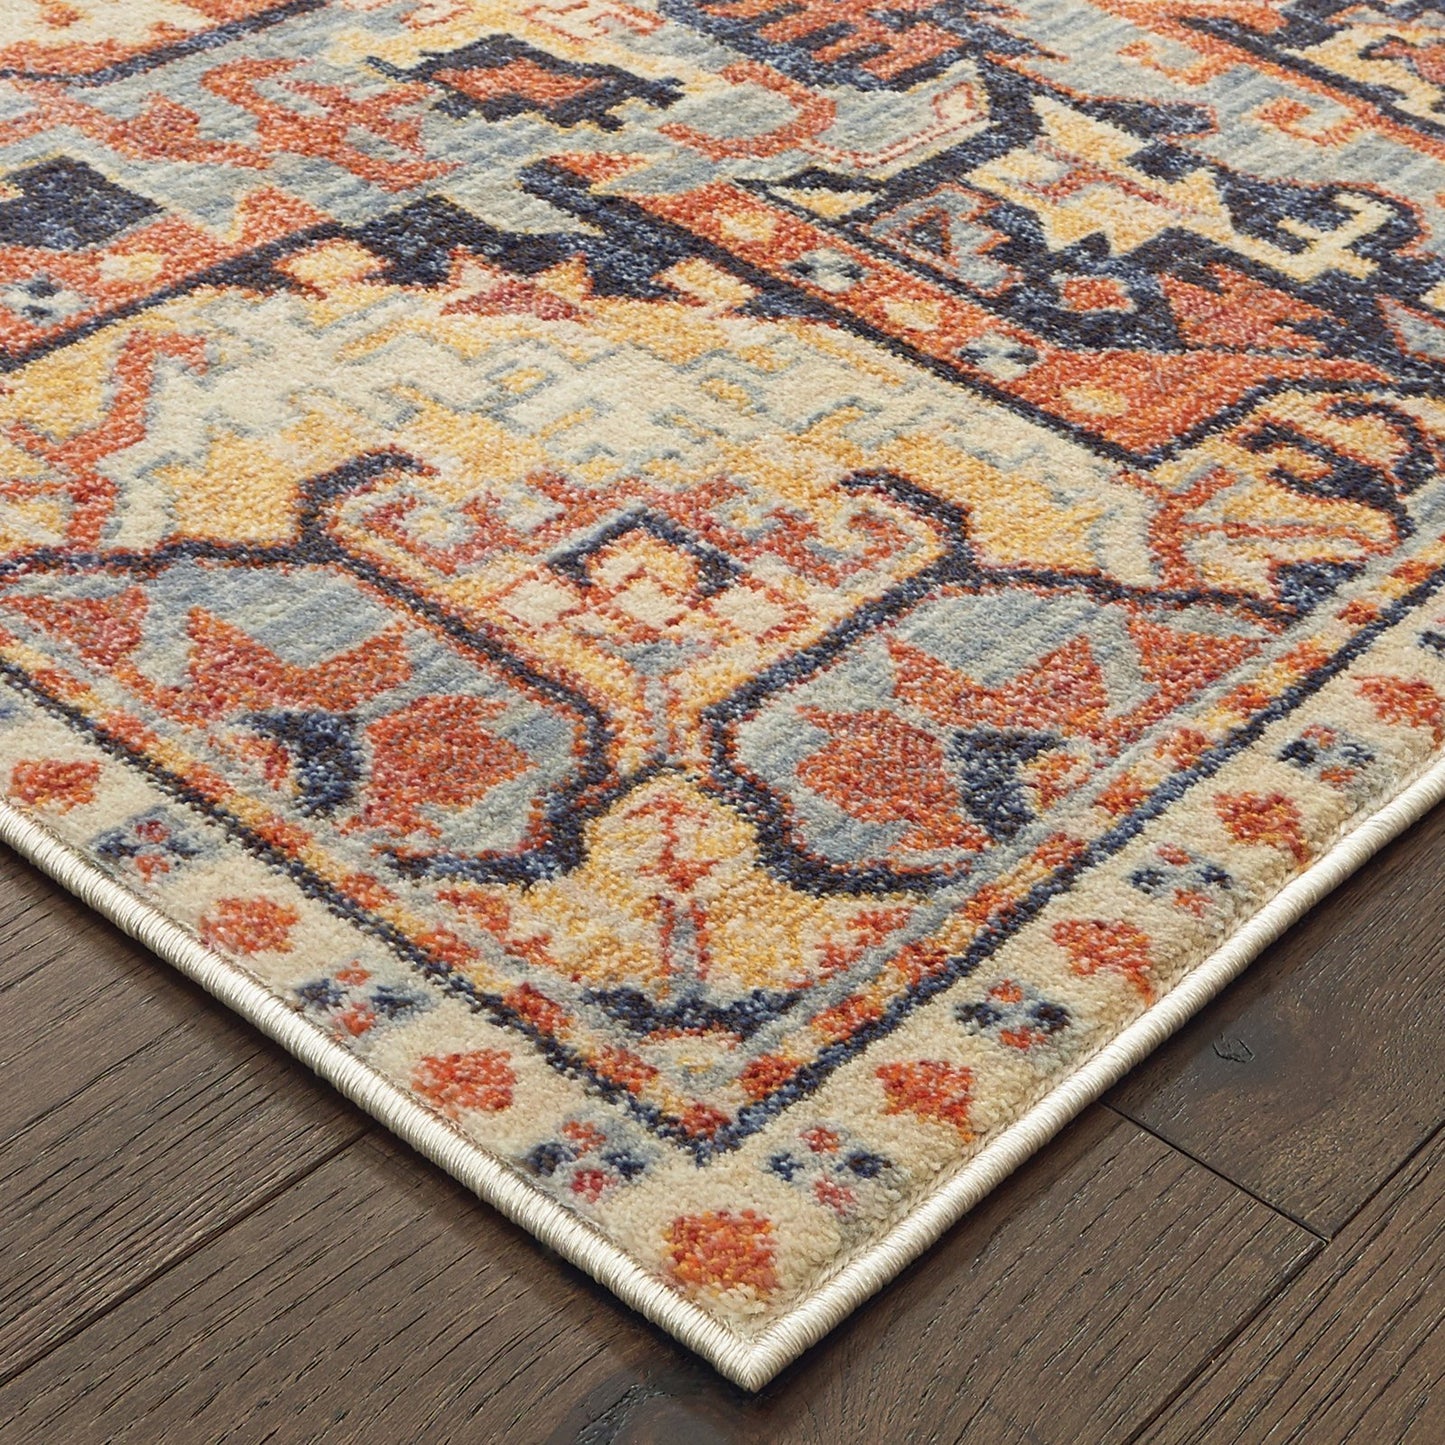 refined carpet rugs oriental weavers pandora collection area rugs online rug store toscana collection rug store orange county traditional area rugs orange county rug store